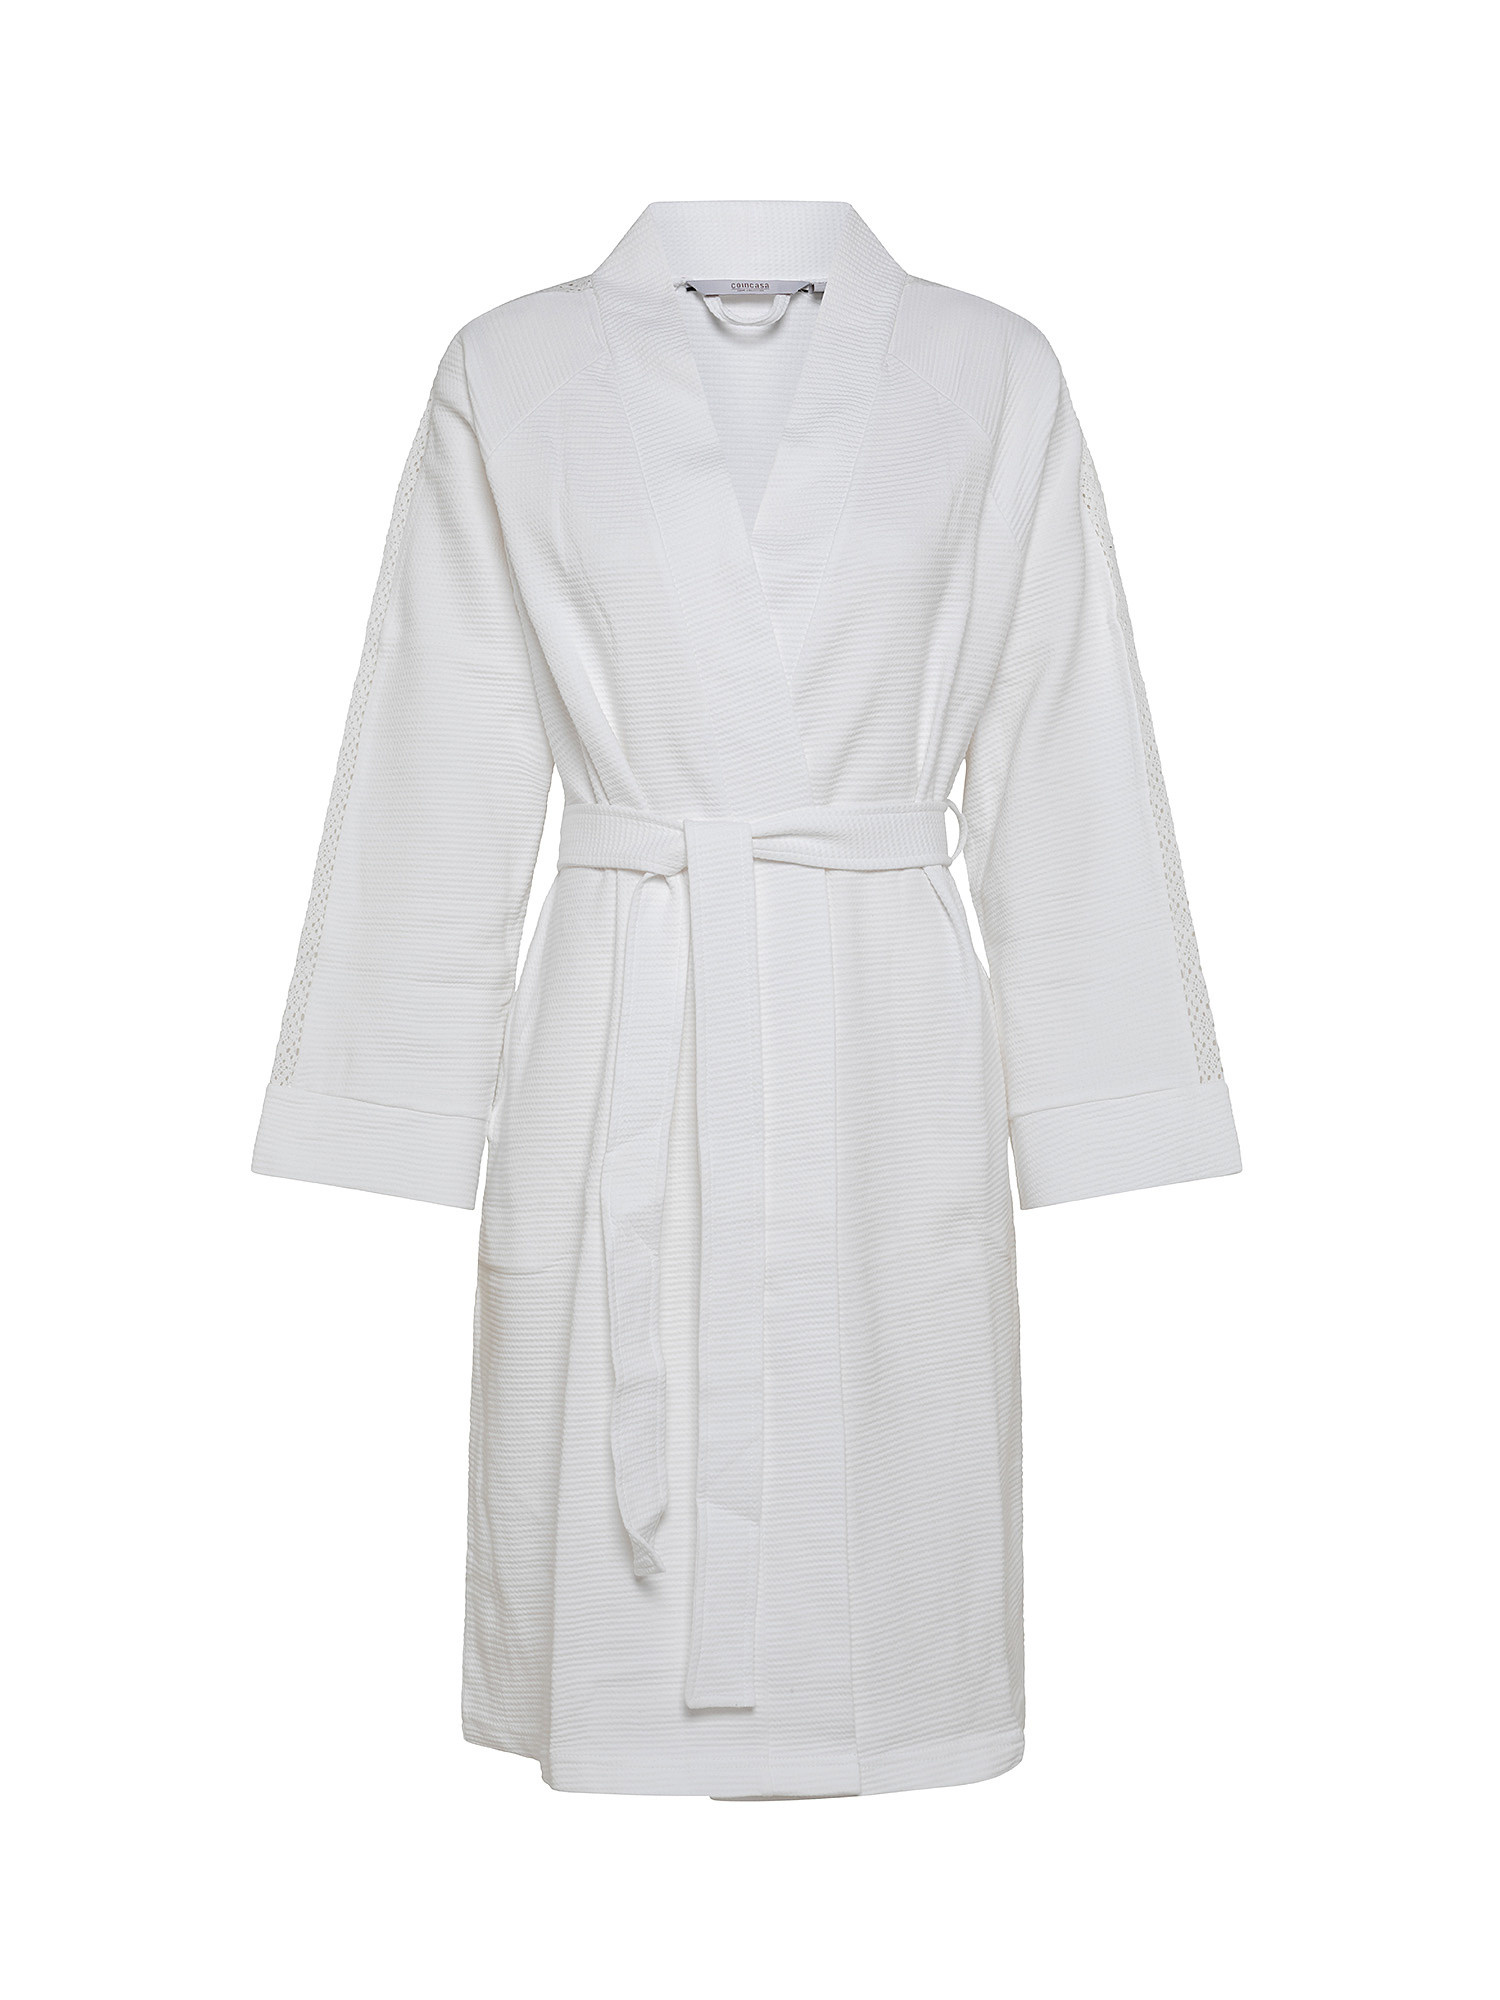 Cotton pique bathrobe with lace inserts, White, large image number 0